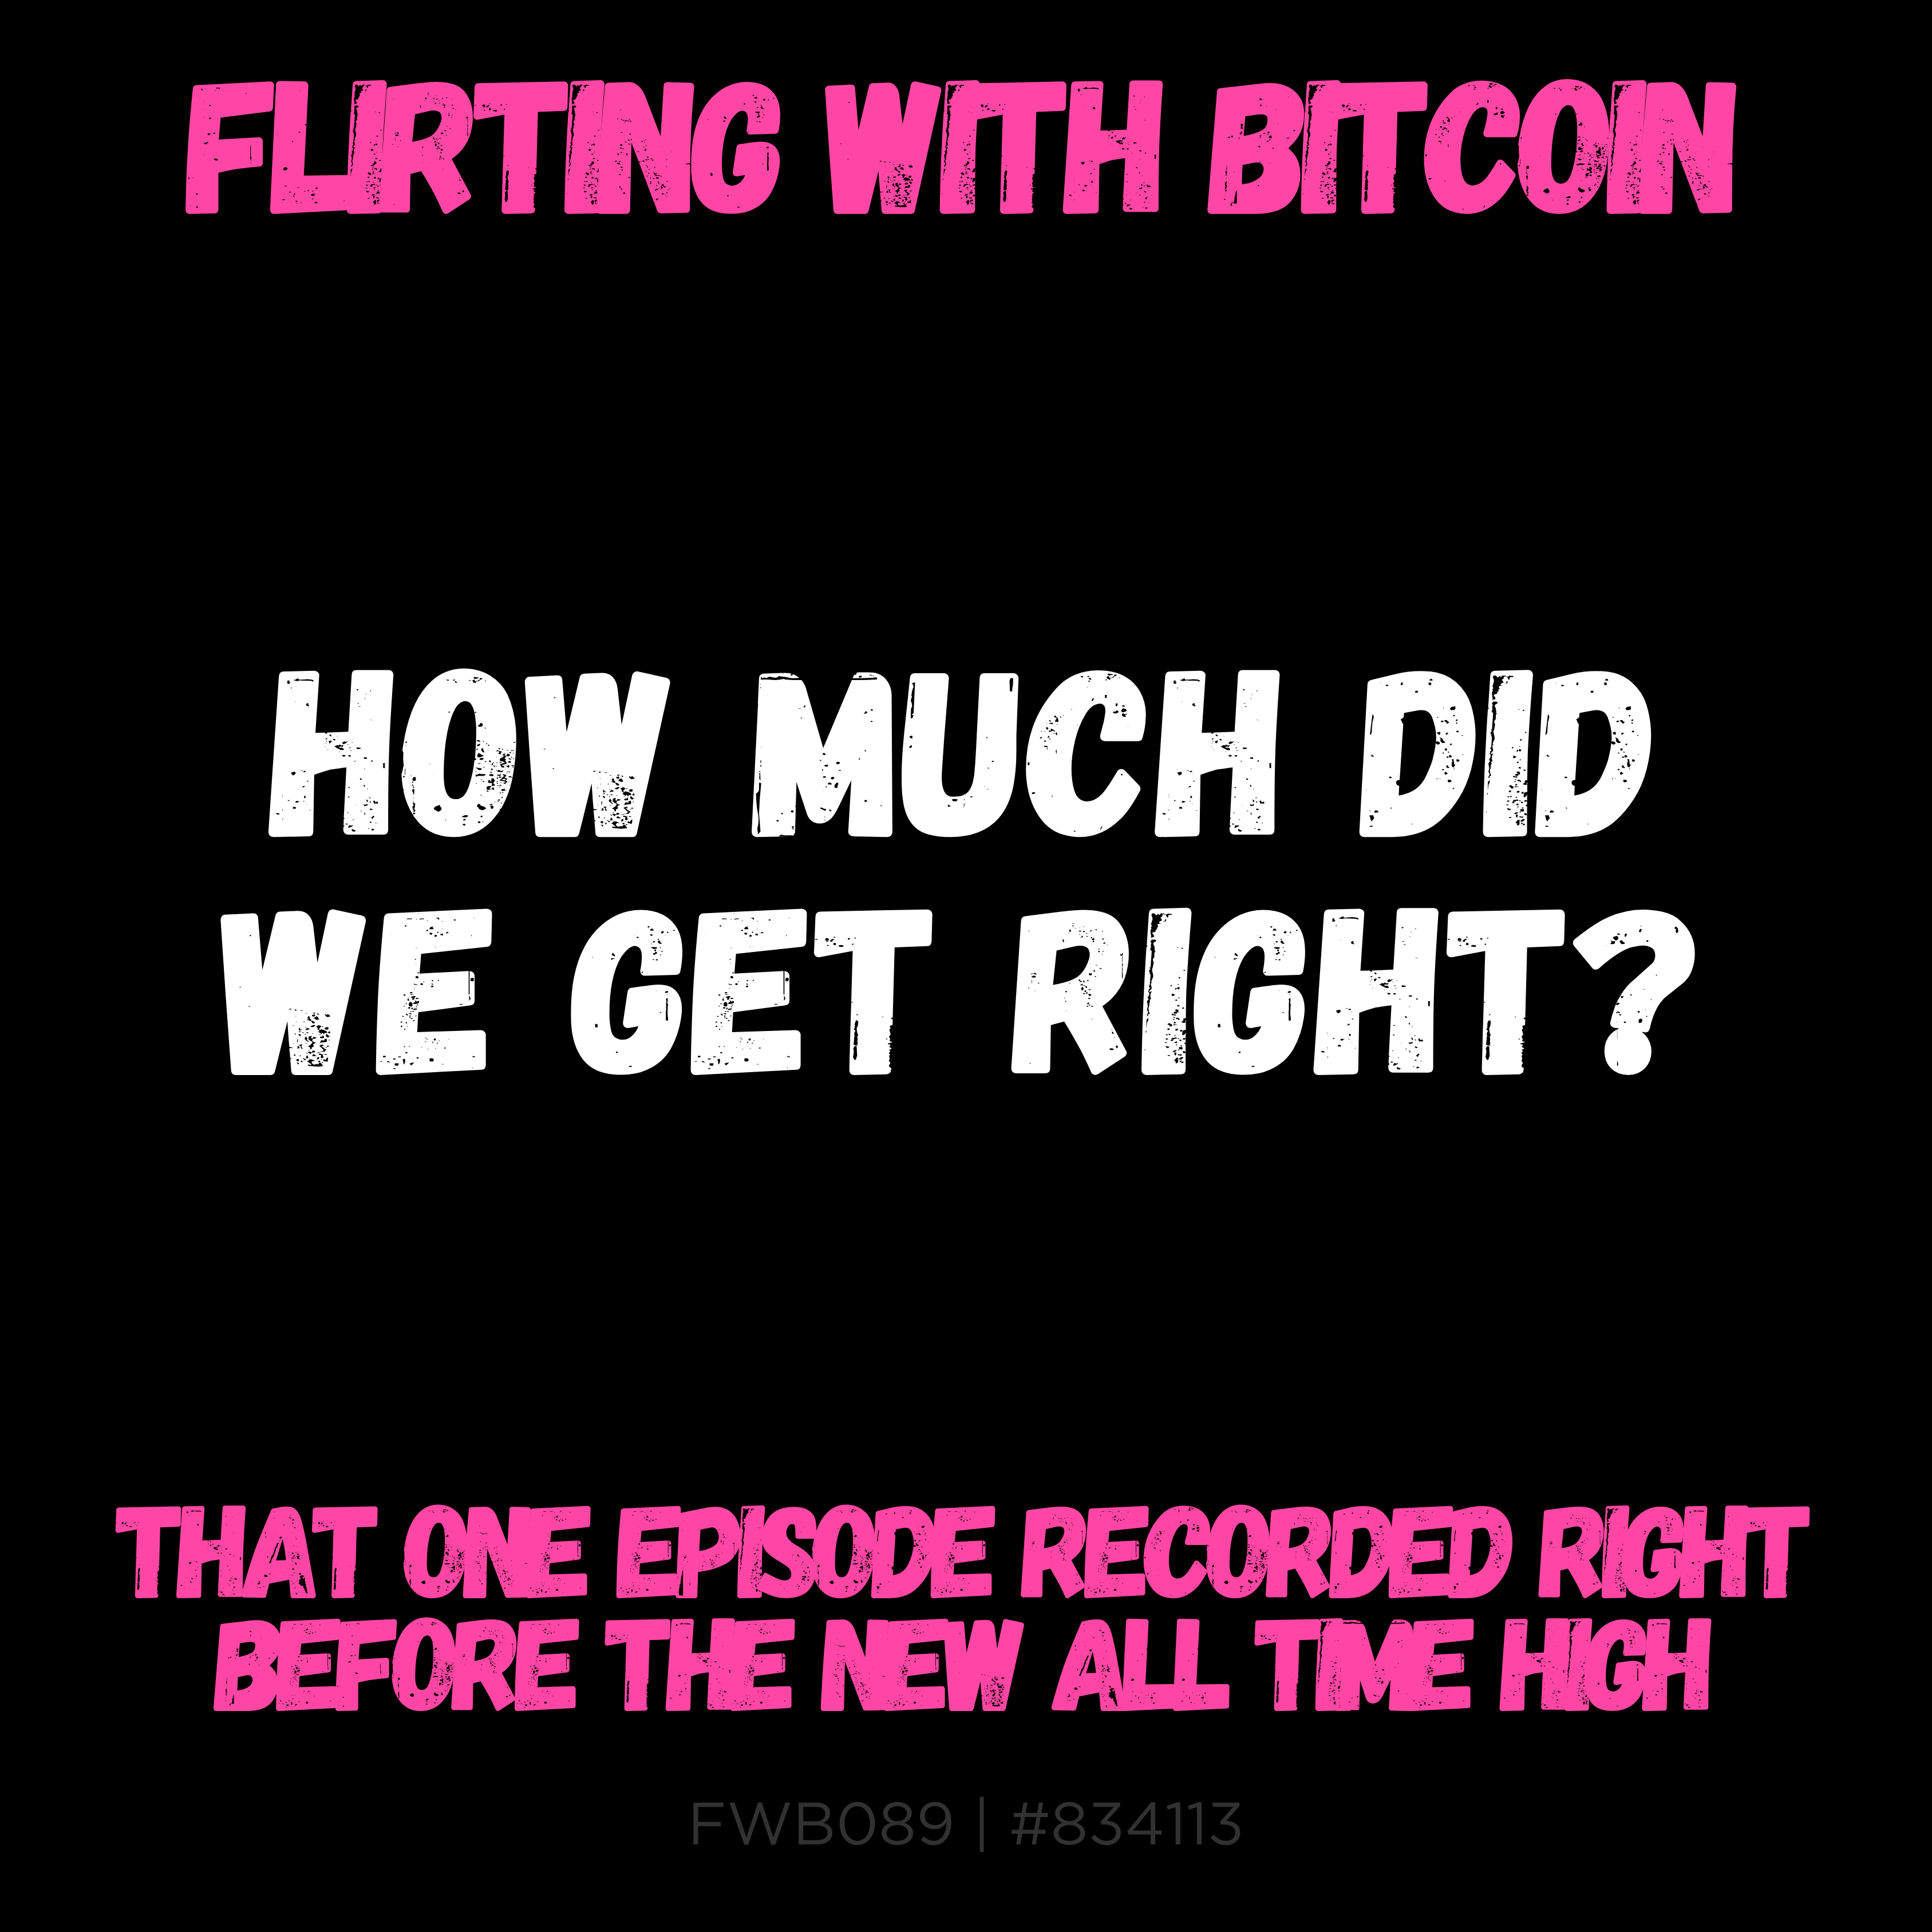 ⚡📈 FWB089 - That One Episode Recorded Right Before The New All Time High